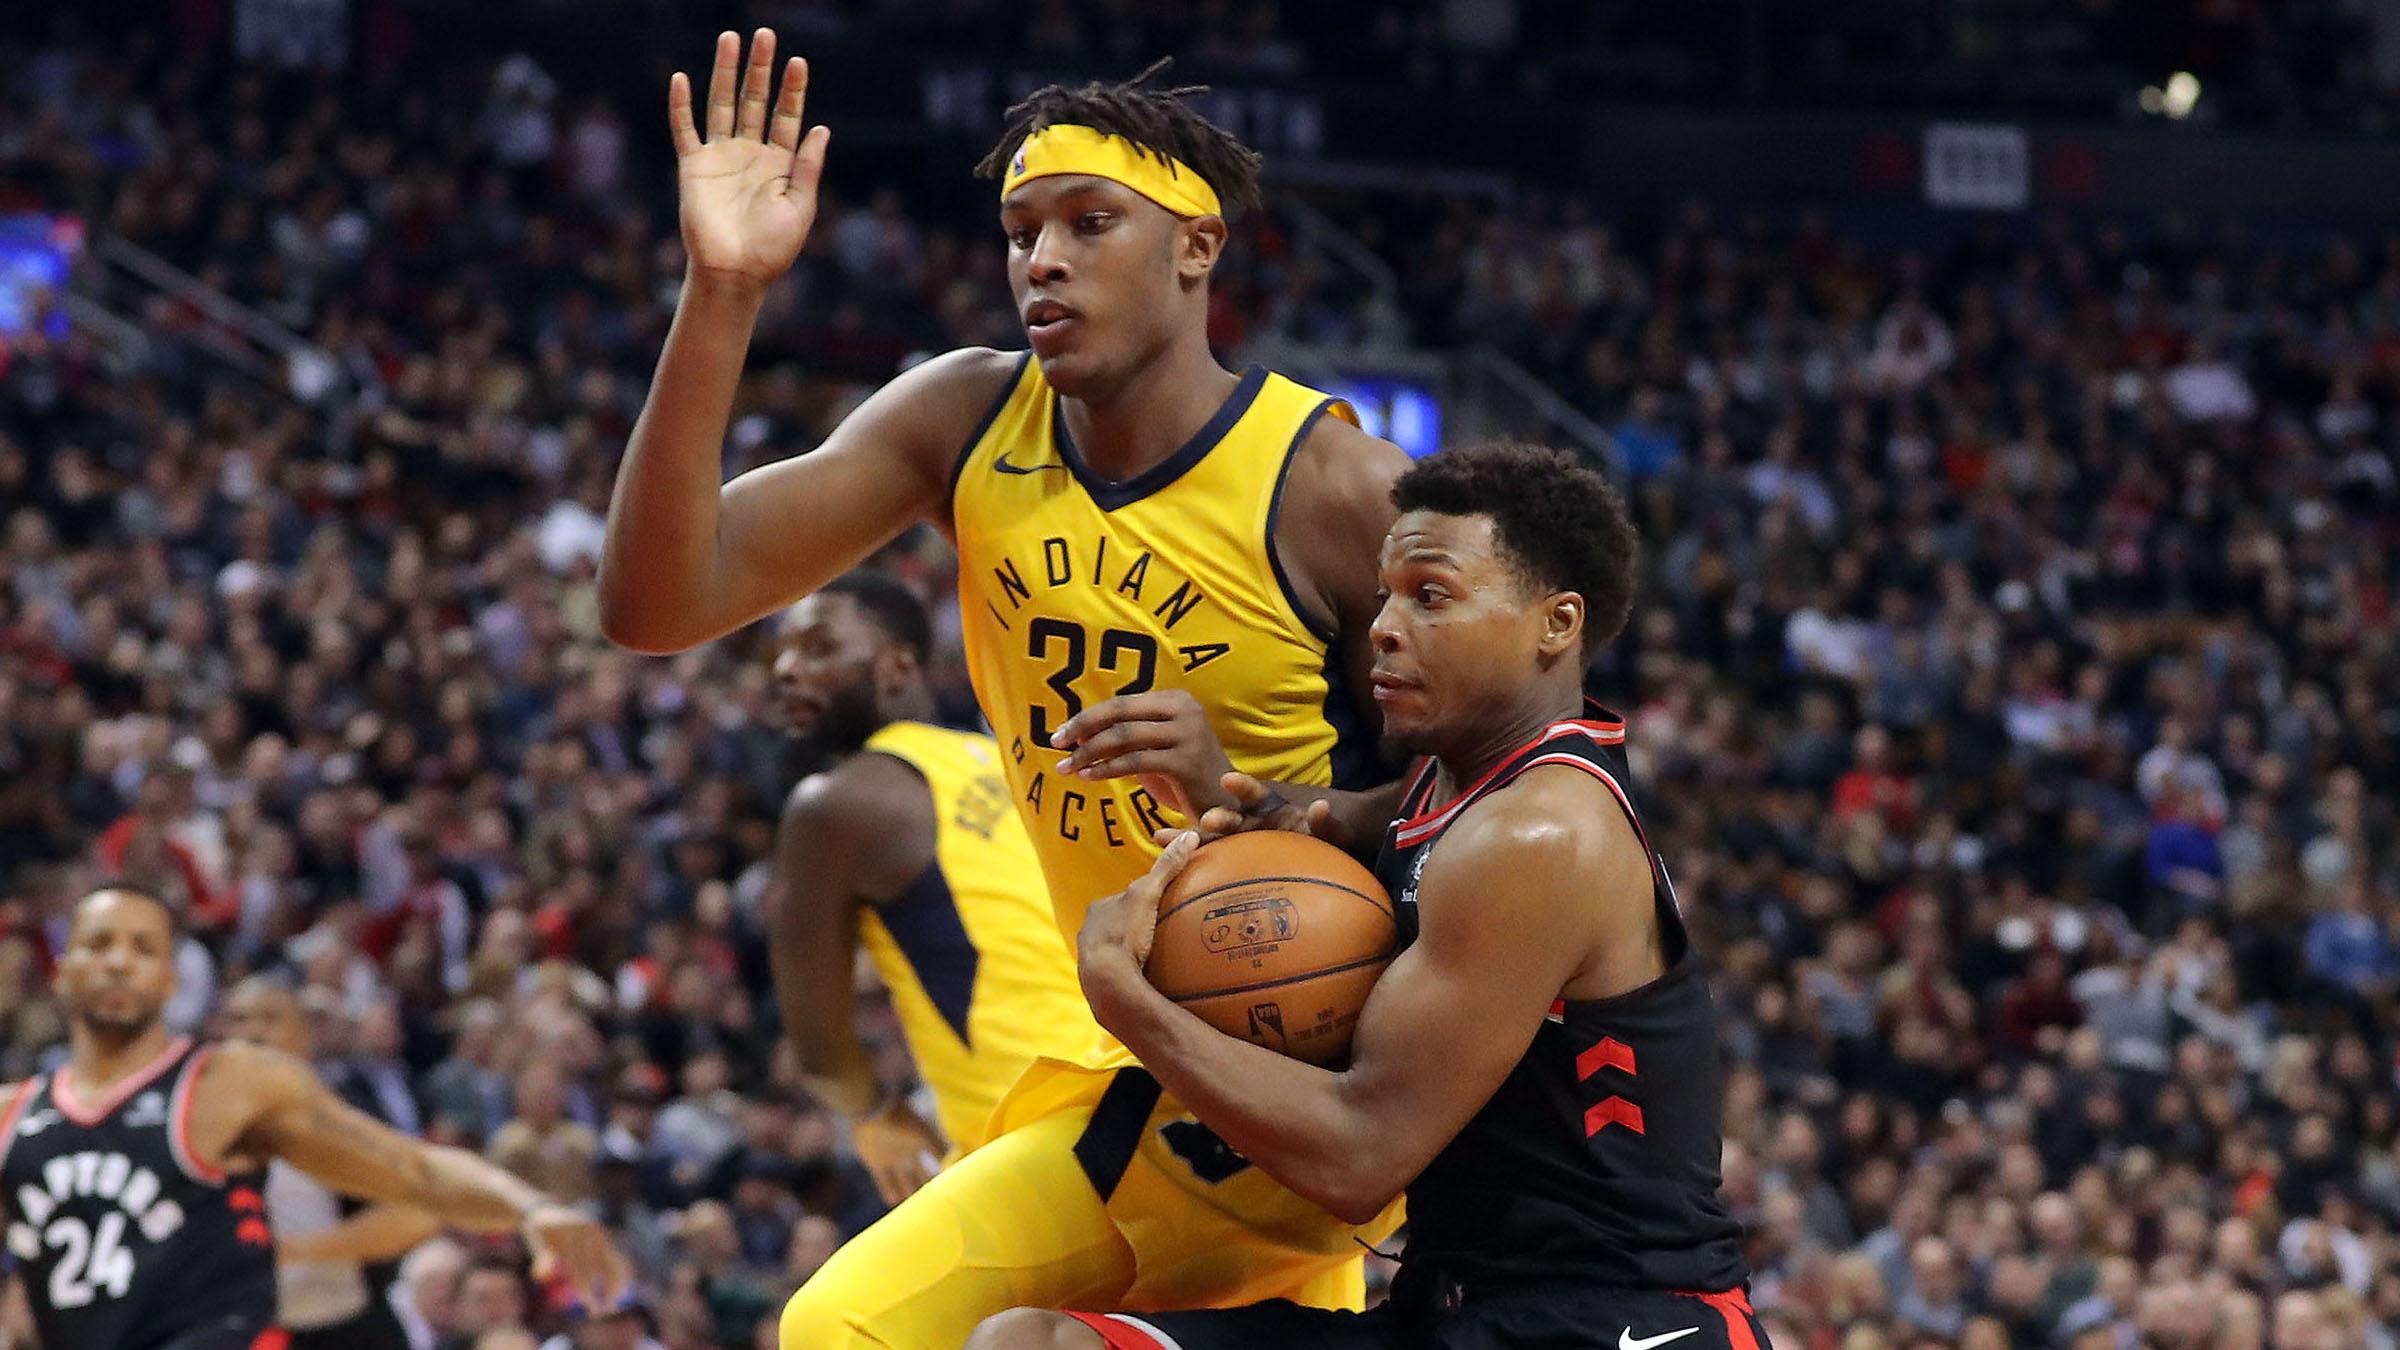 Toronto Raptors point guard Kyle Lowry (7) drives to the basket against Indiana Pacers forward Myles Turner (33) at Air Canada Centre. The Raptors beat the Pacers 120-115. / Tom Szczerbowski-USA TODAY Sports